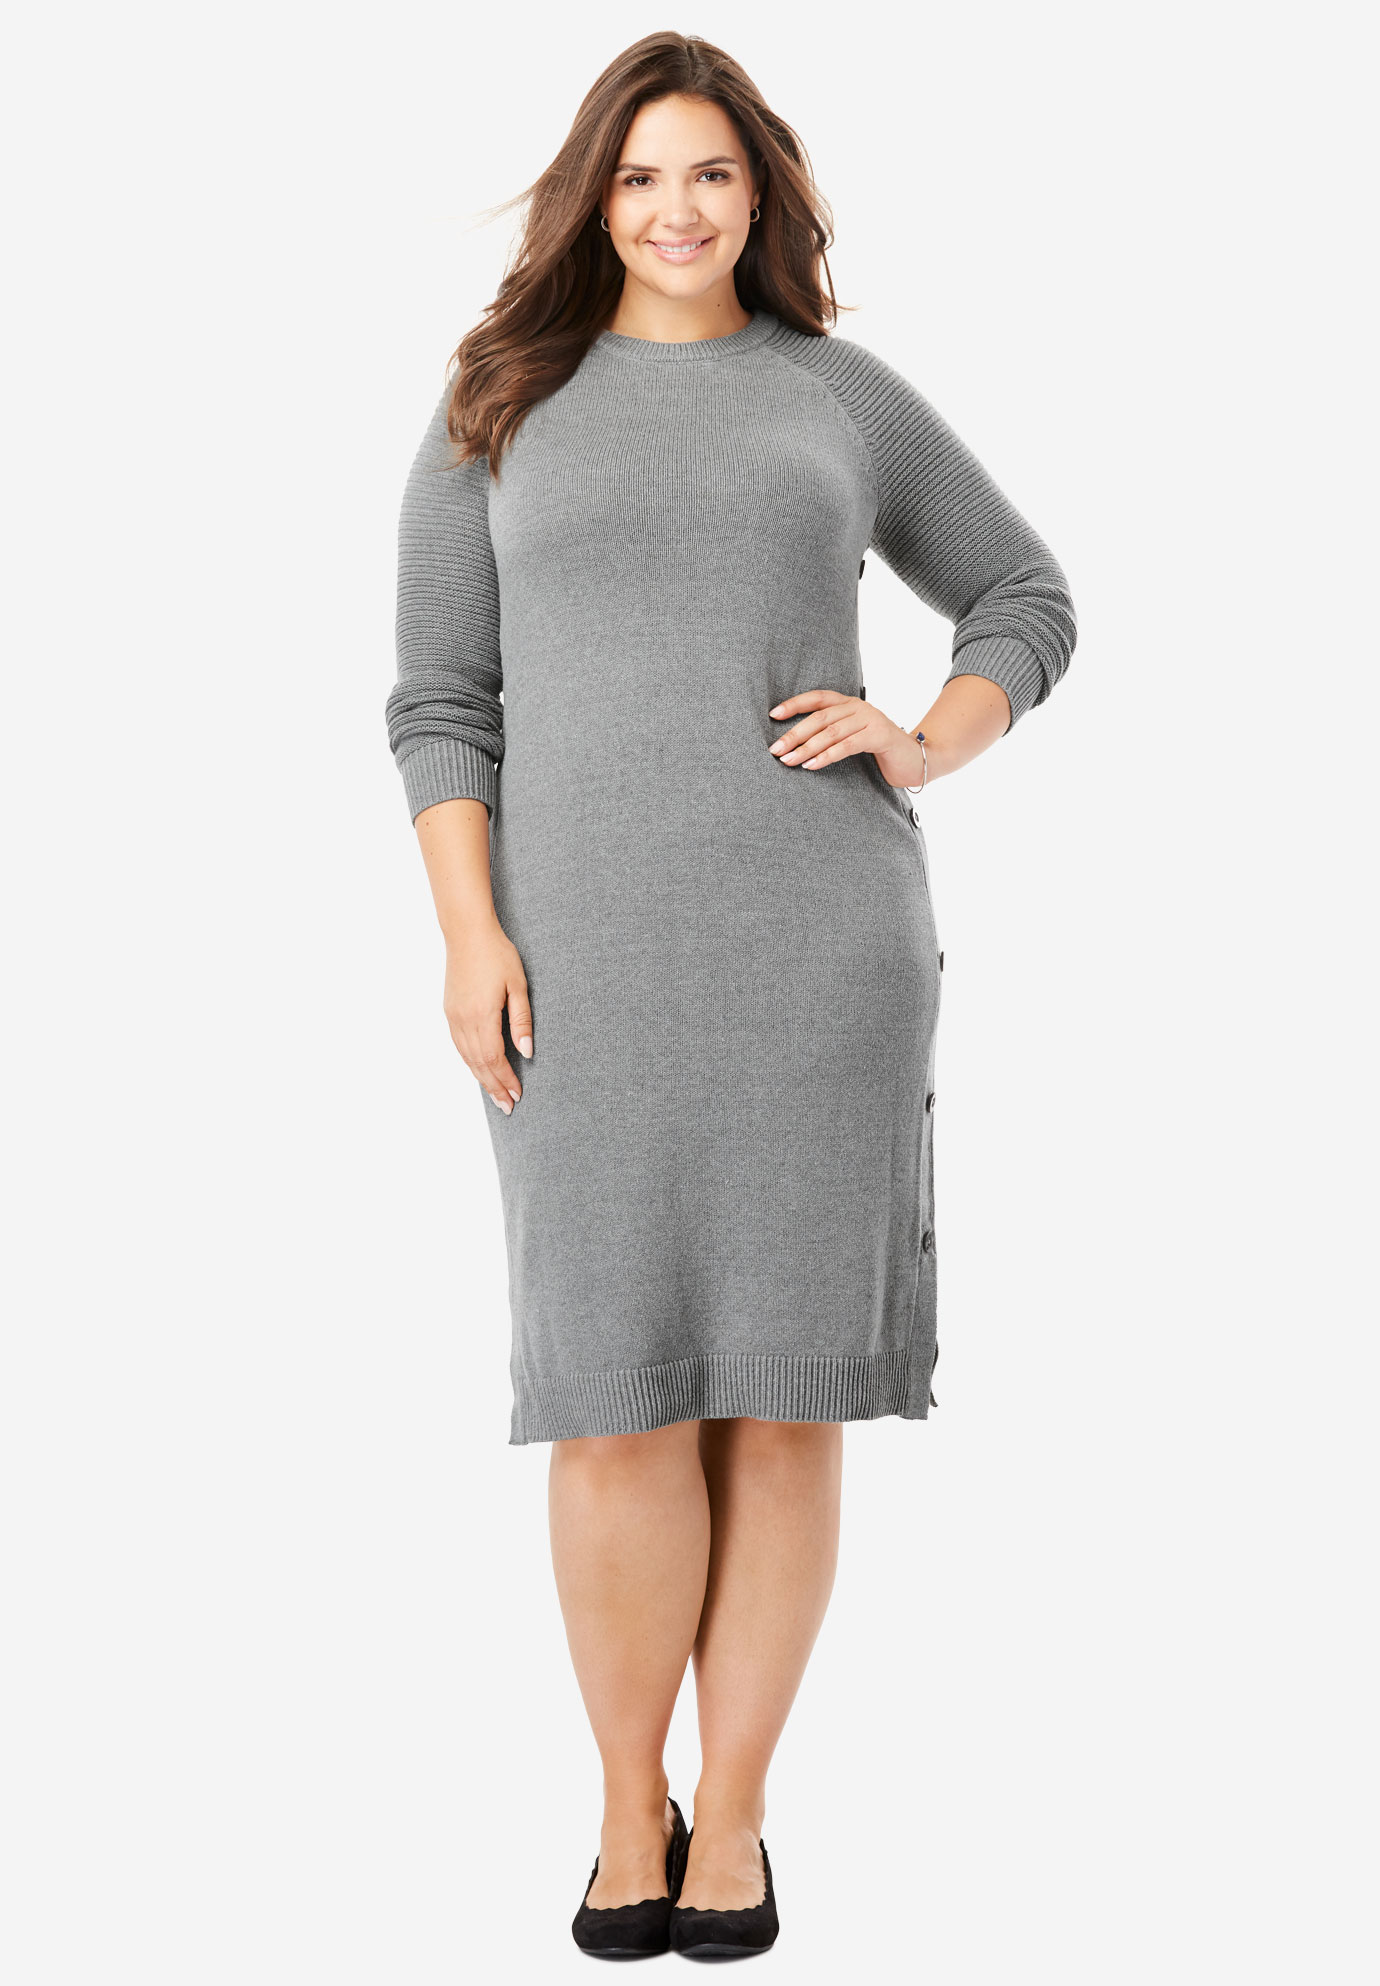 sweater dress with buttons on the side